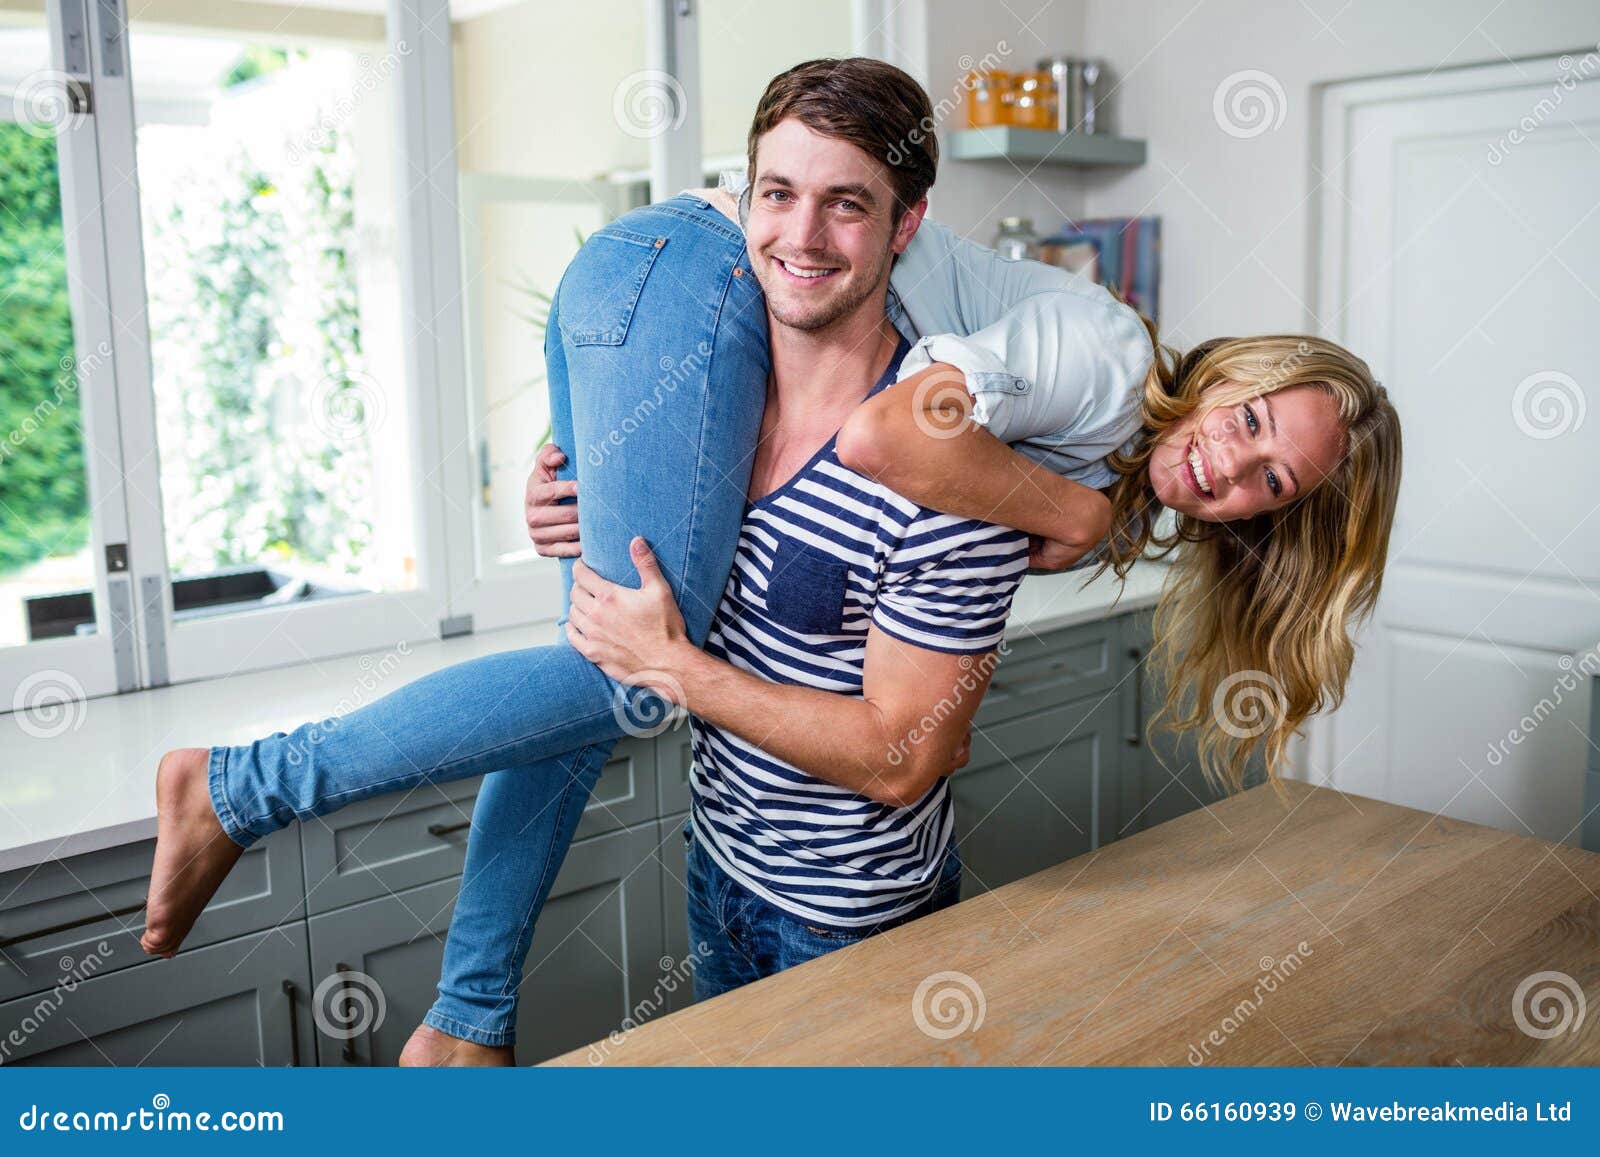 Handsome Man Carrying His Wife Stock Image Image Of Looking